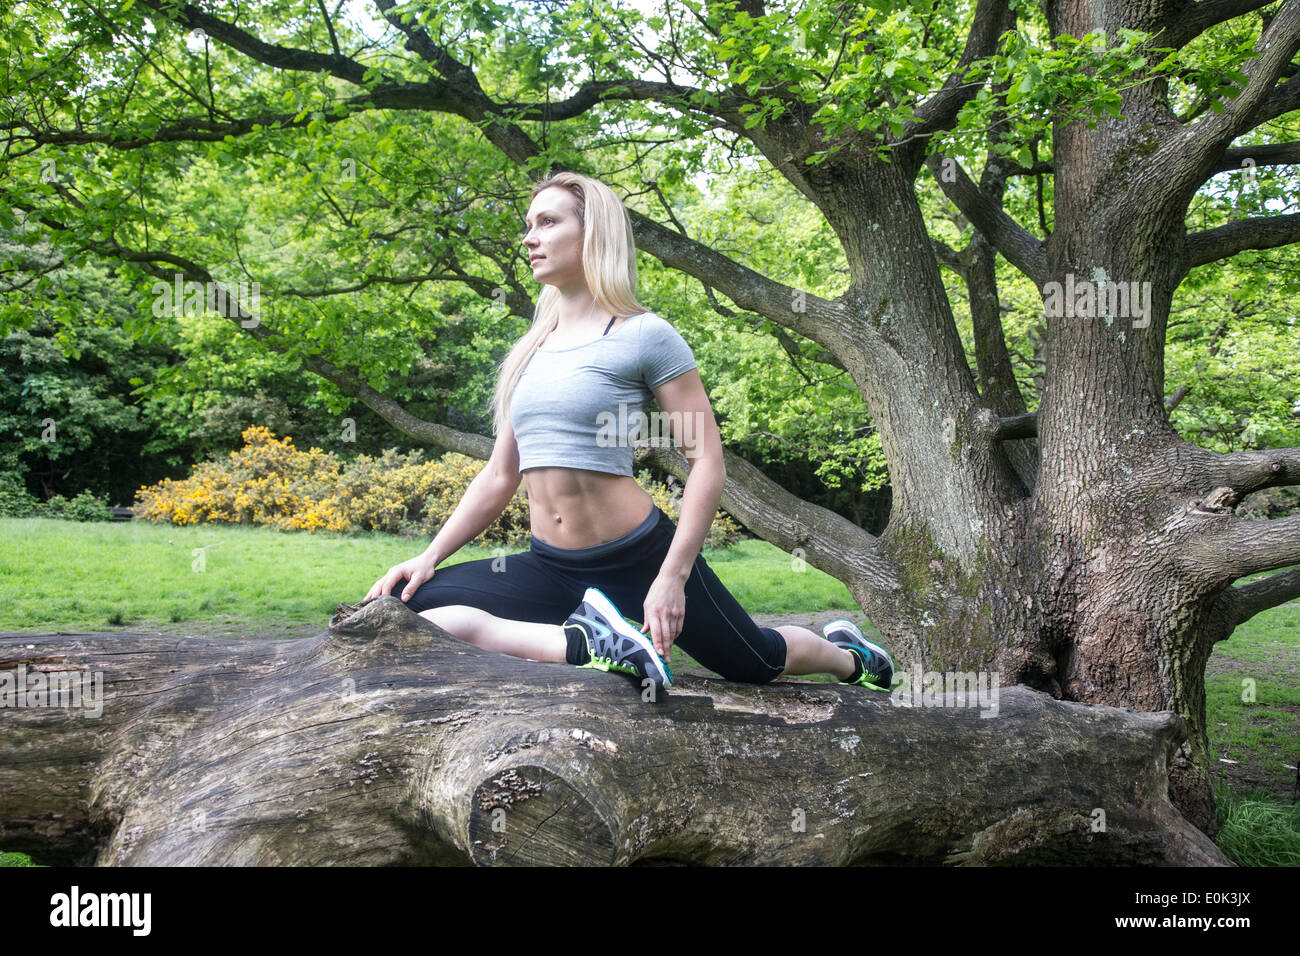 Blonde lady wearing black leggings and a grey crop practicing yoga in the centre of a tree on hampstead heath. Stock Photo